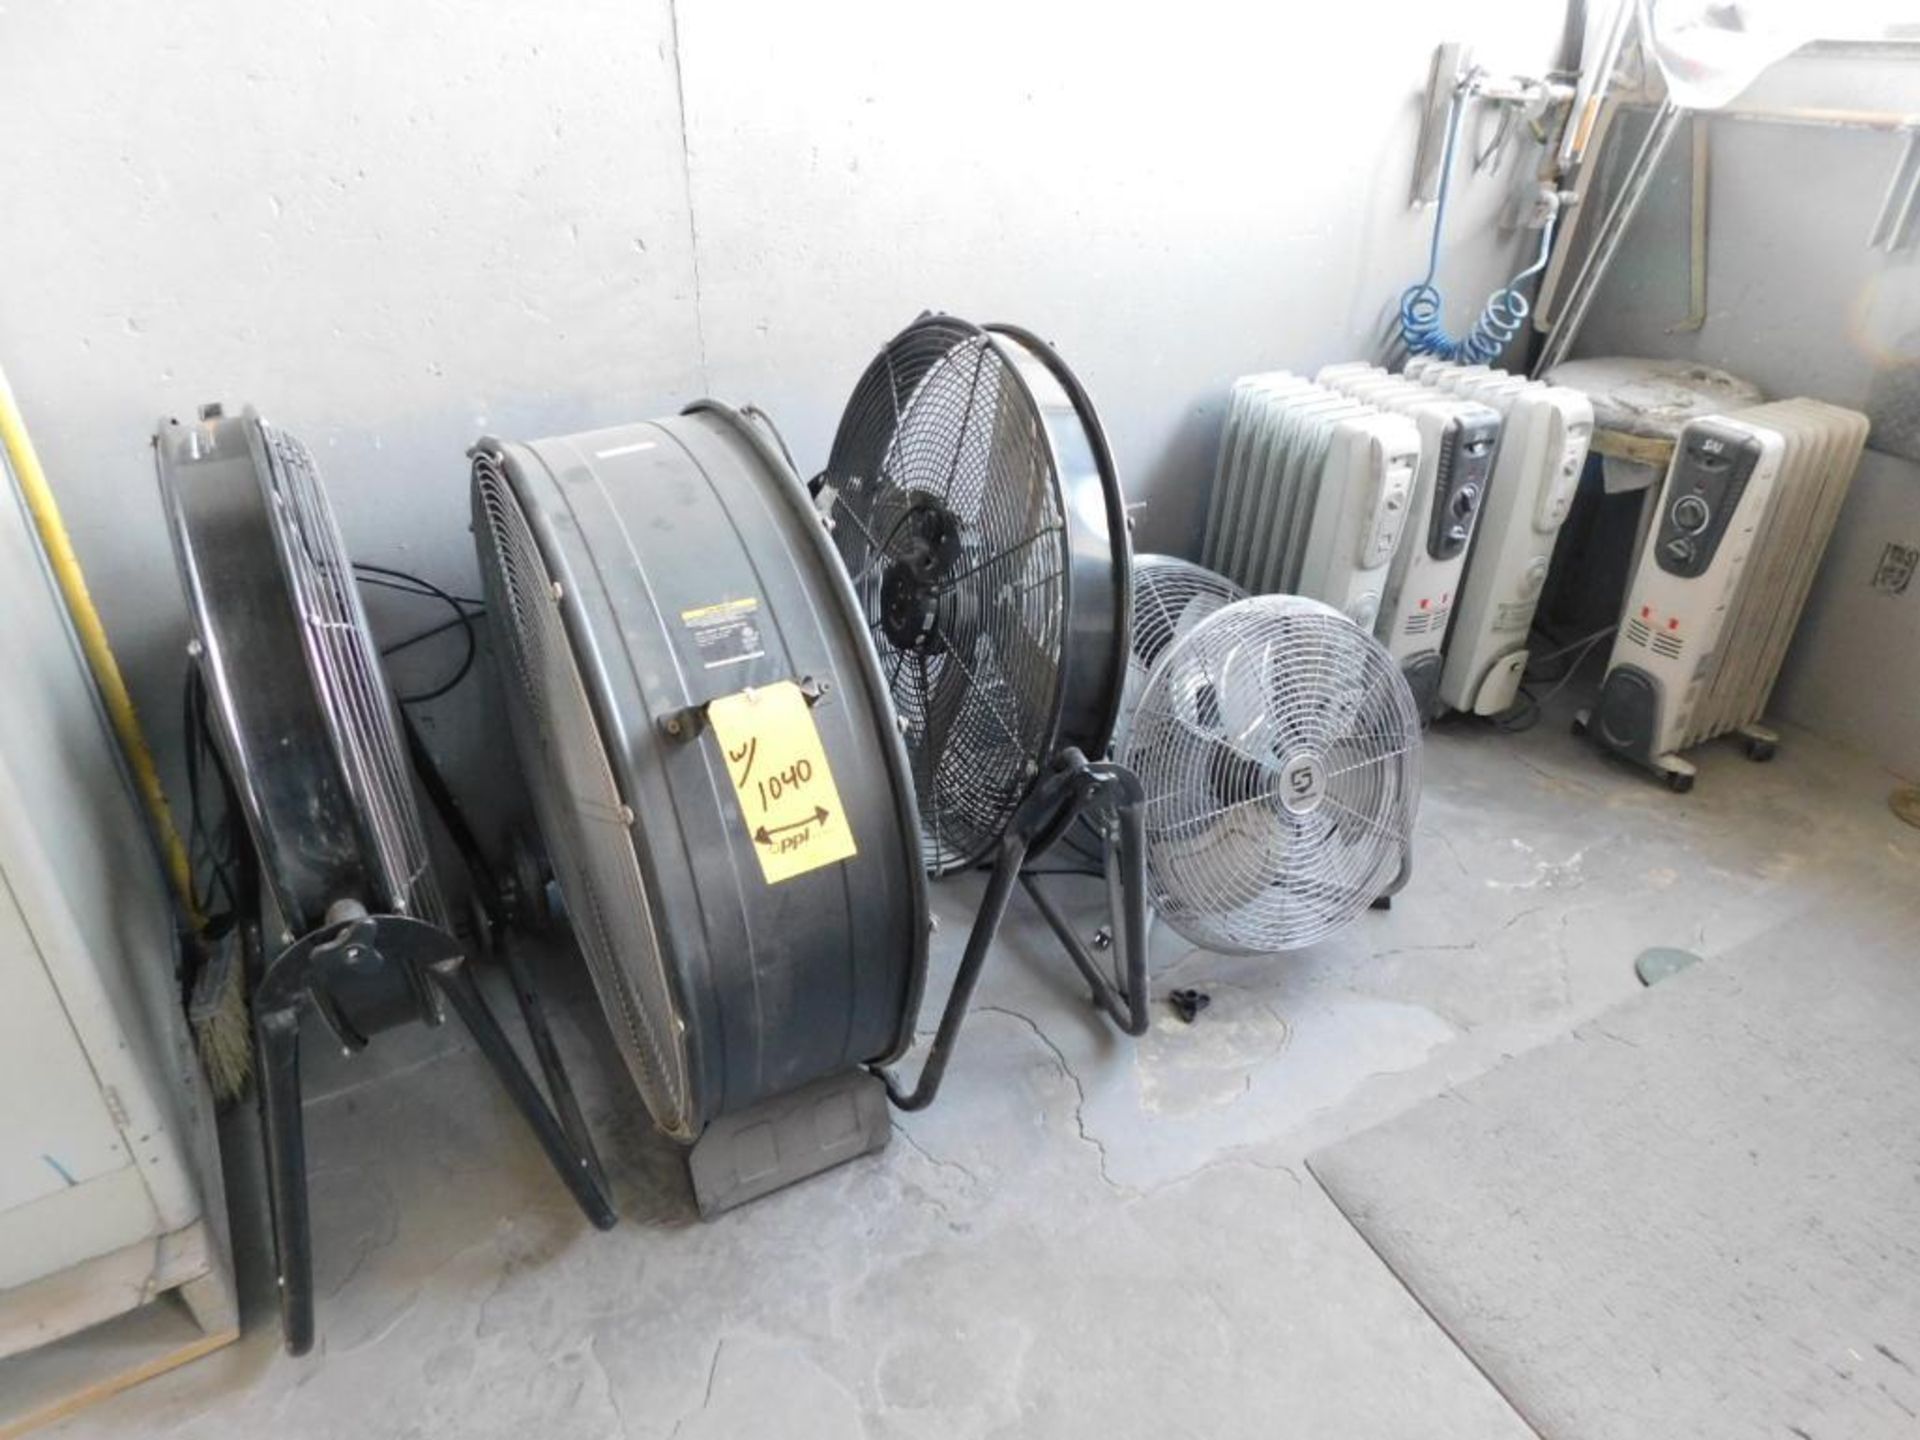 LOT: Abrasive Supplies, Cart, Tool Box, 30" x 72" Maple Top Work Bench, Fans, Heaters, etc. - Image 8 of 11